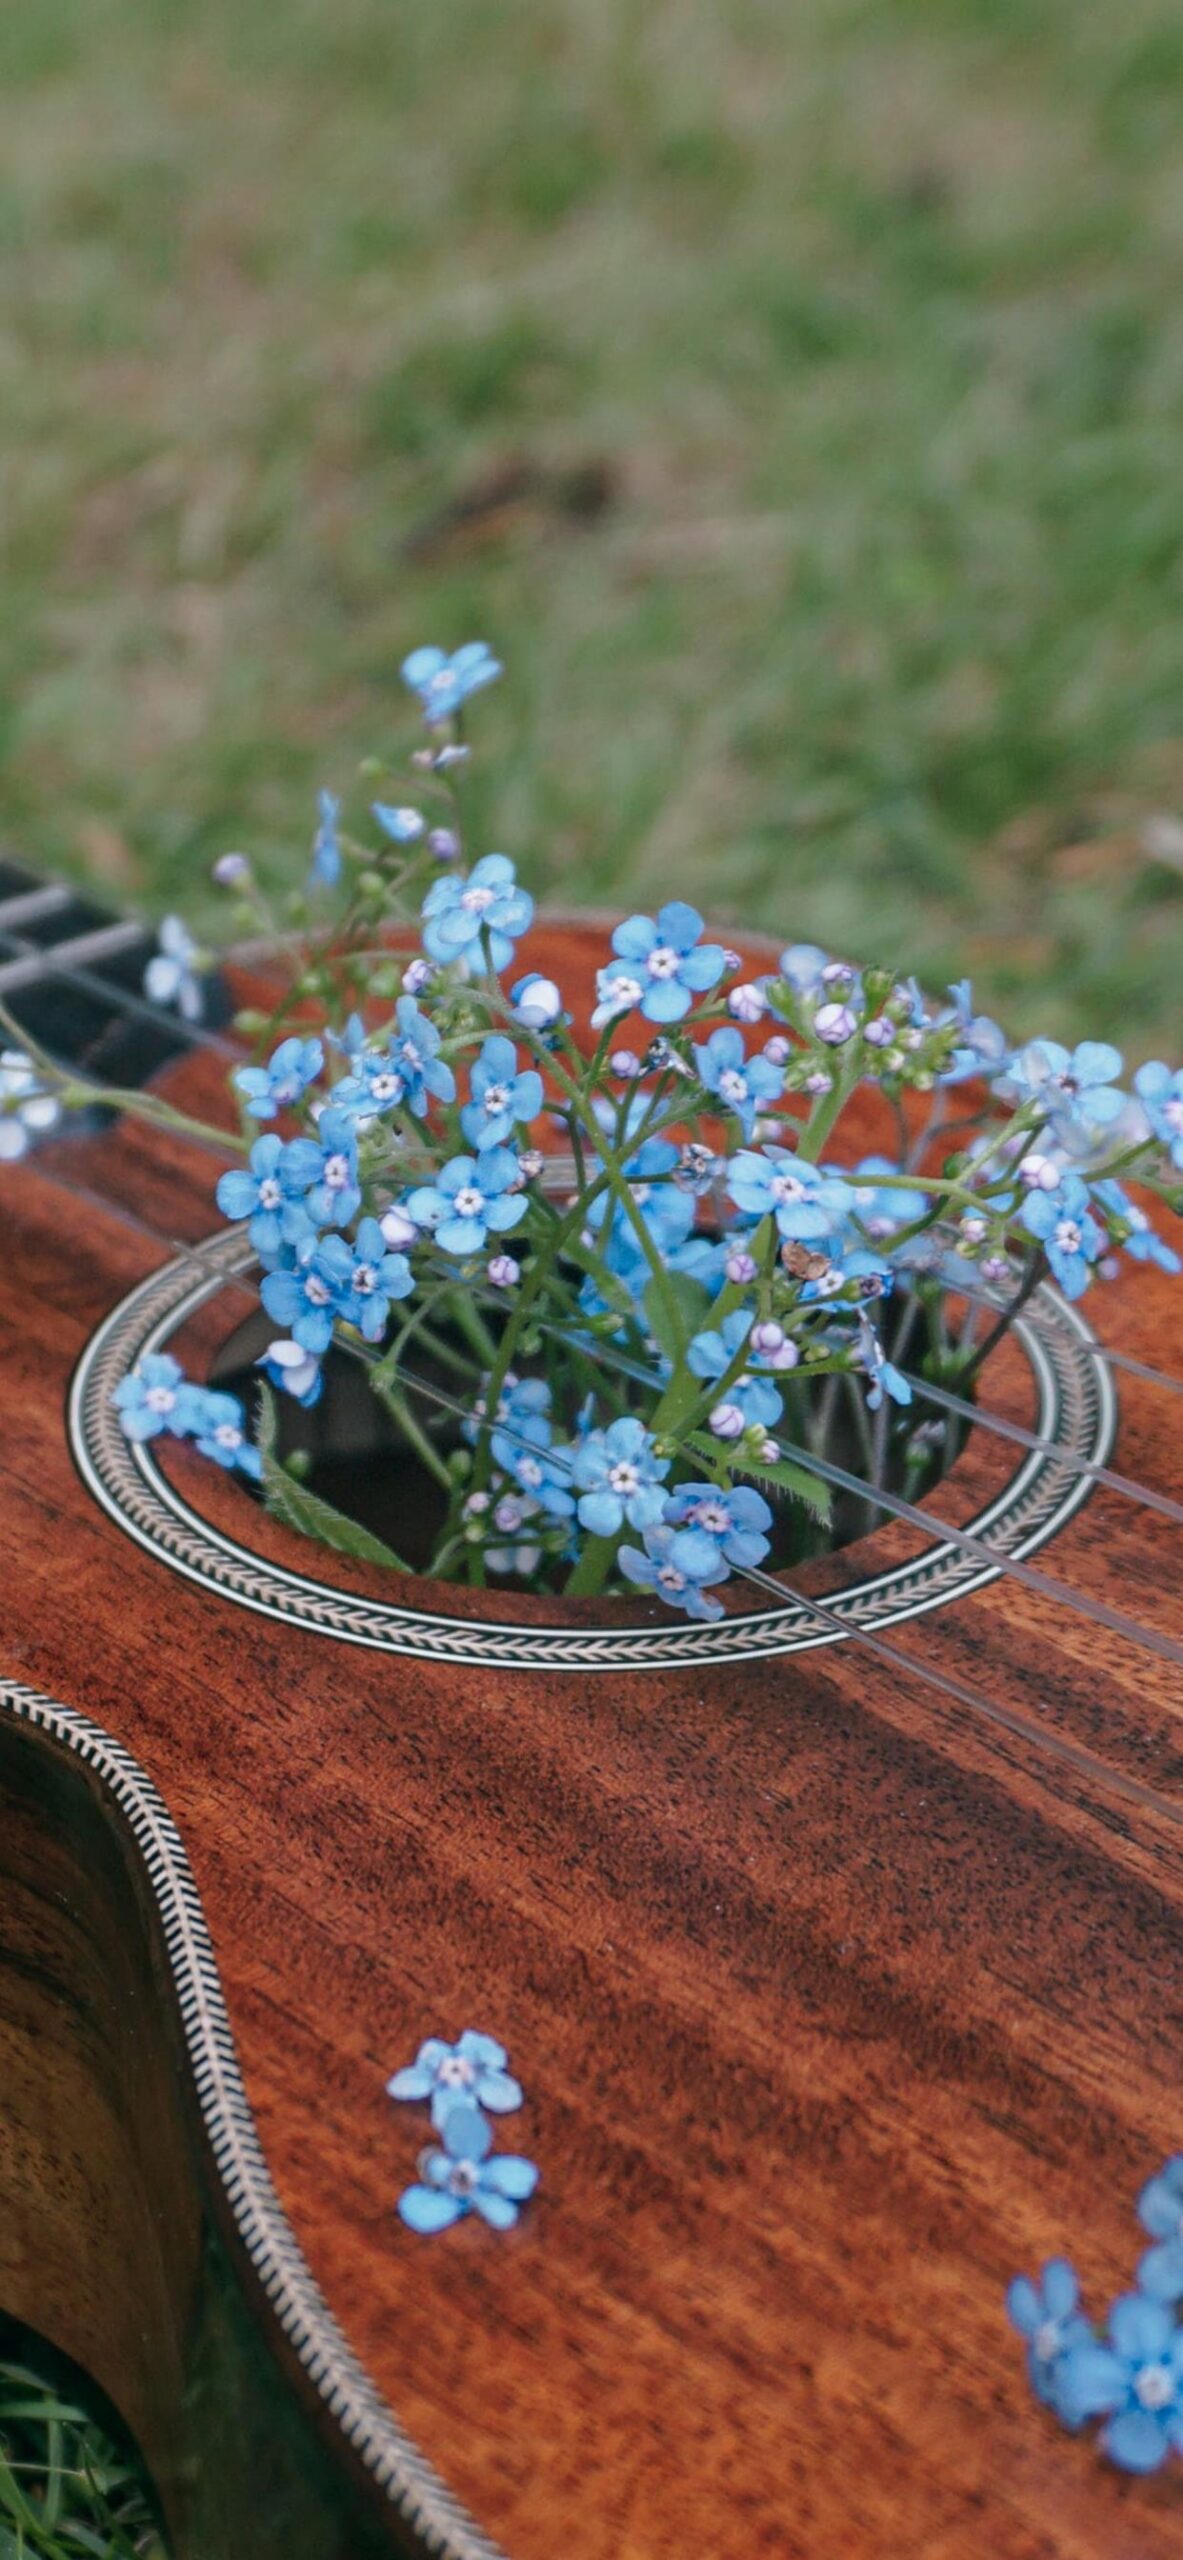 Blue Flowers Blooming in the Guitar